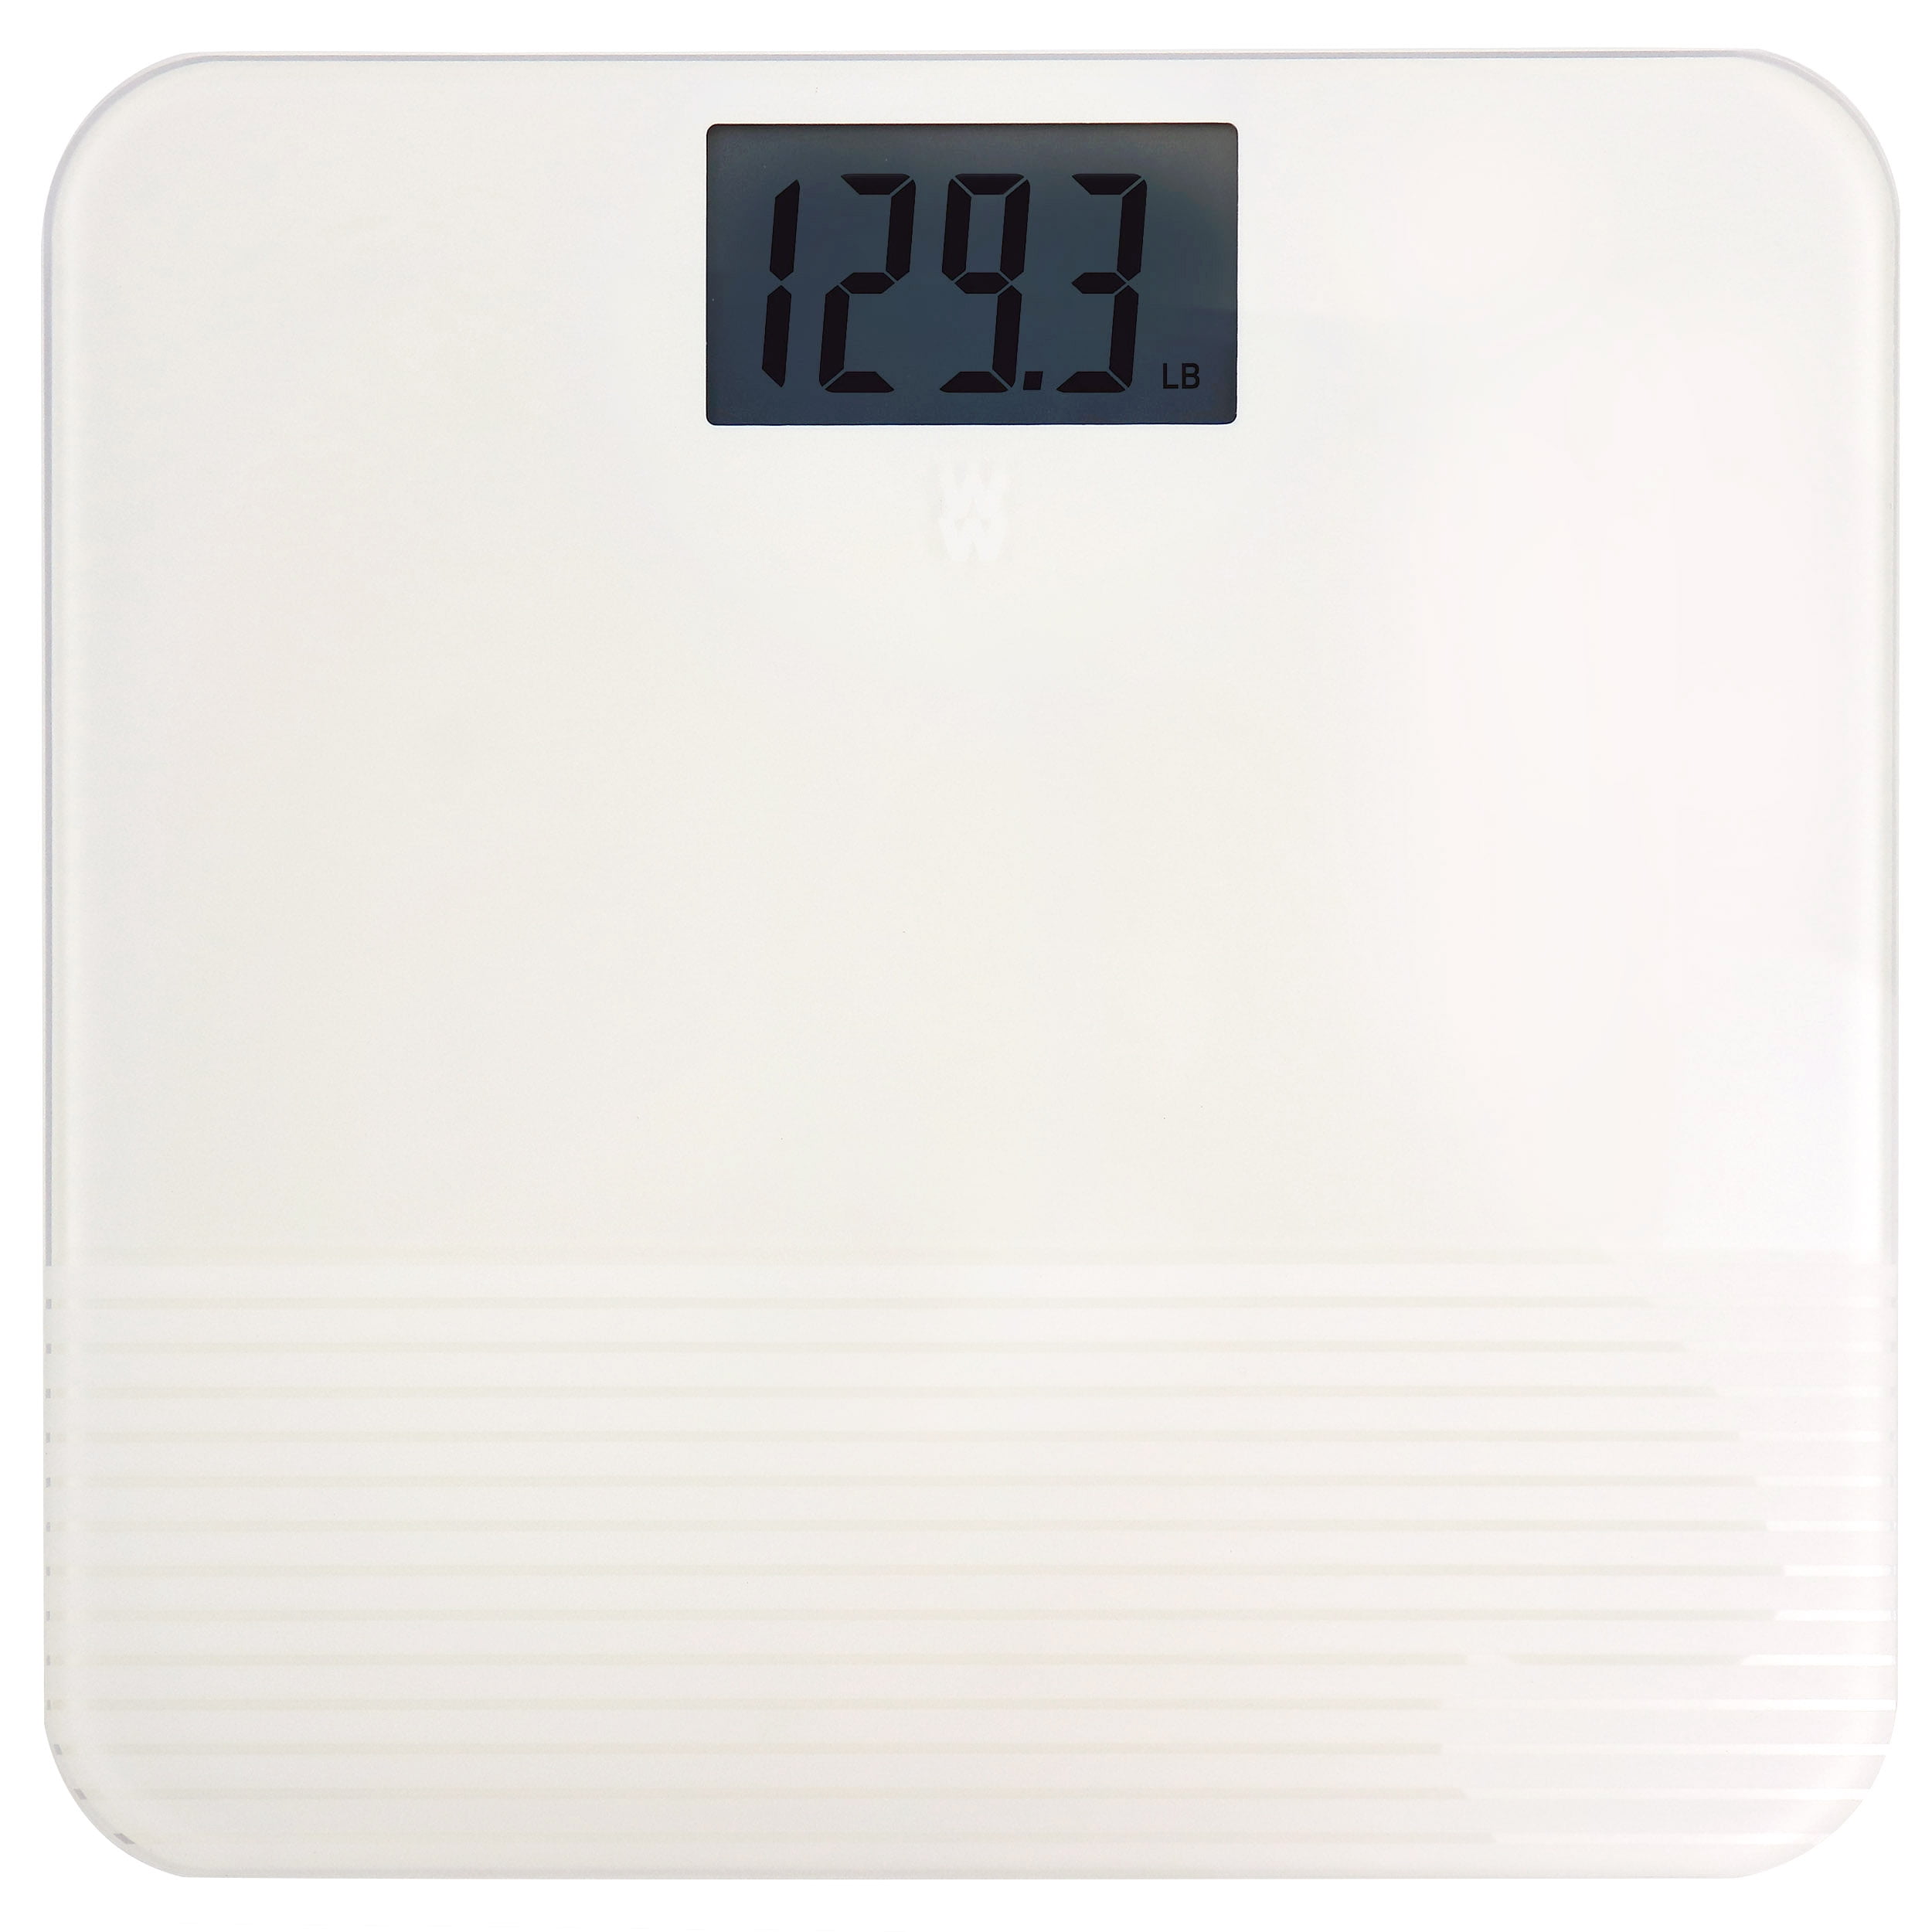 Weight Watchers Scales by Conair Scale for Body Weight, Digital Bathroom  Scale in White